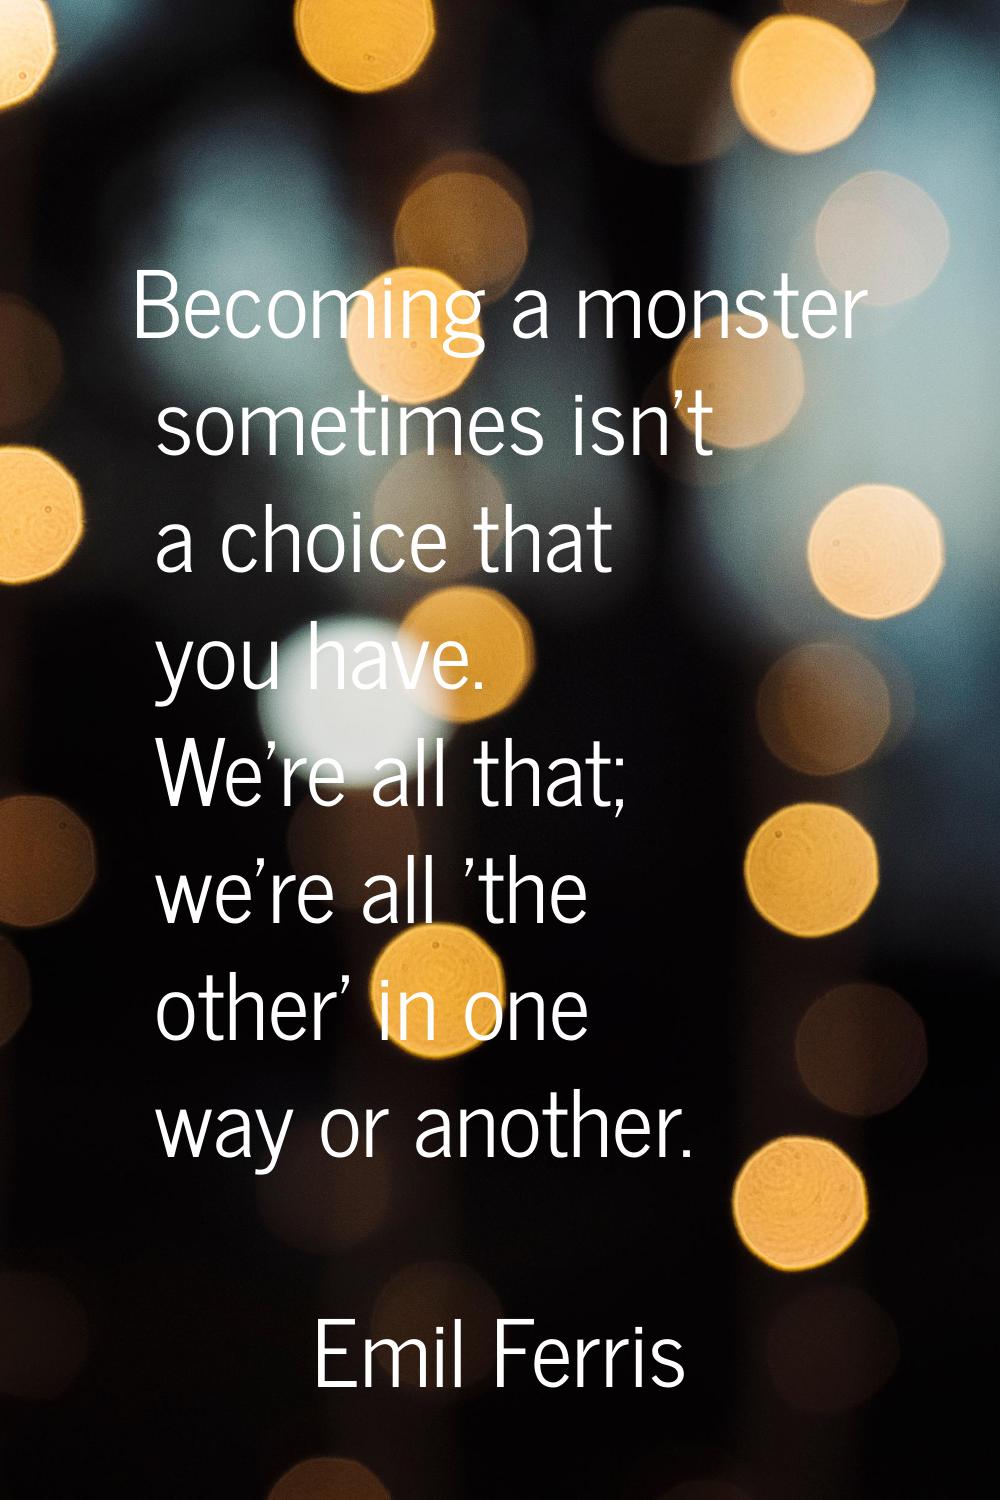 Becoming a monster sometimes isn't a choice that you have. We're all that; we're all 'the other' in